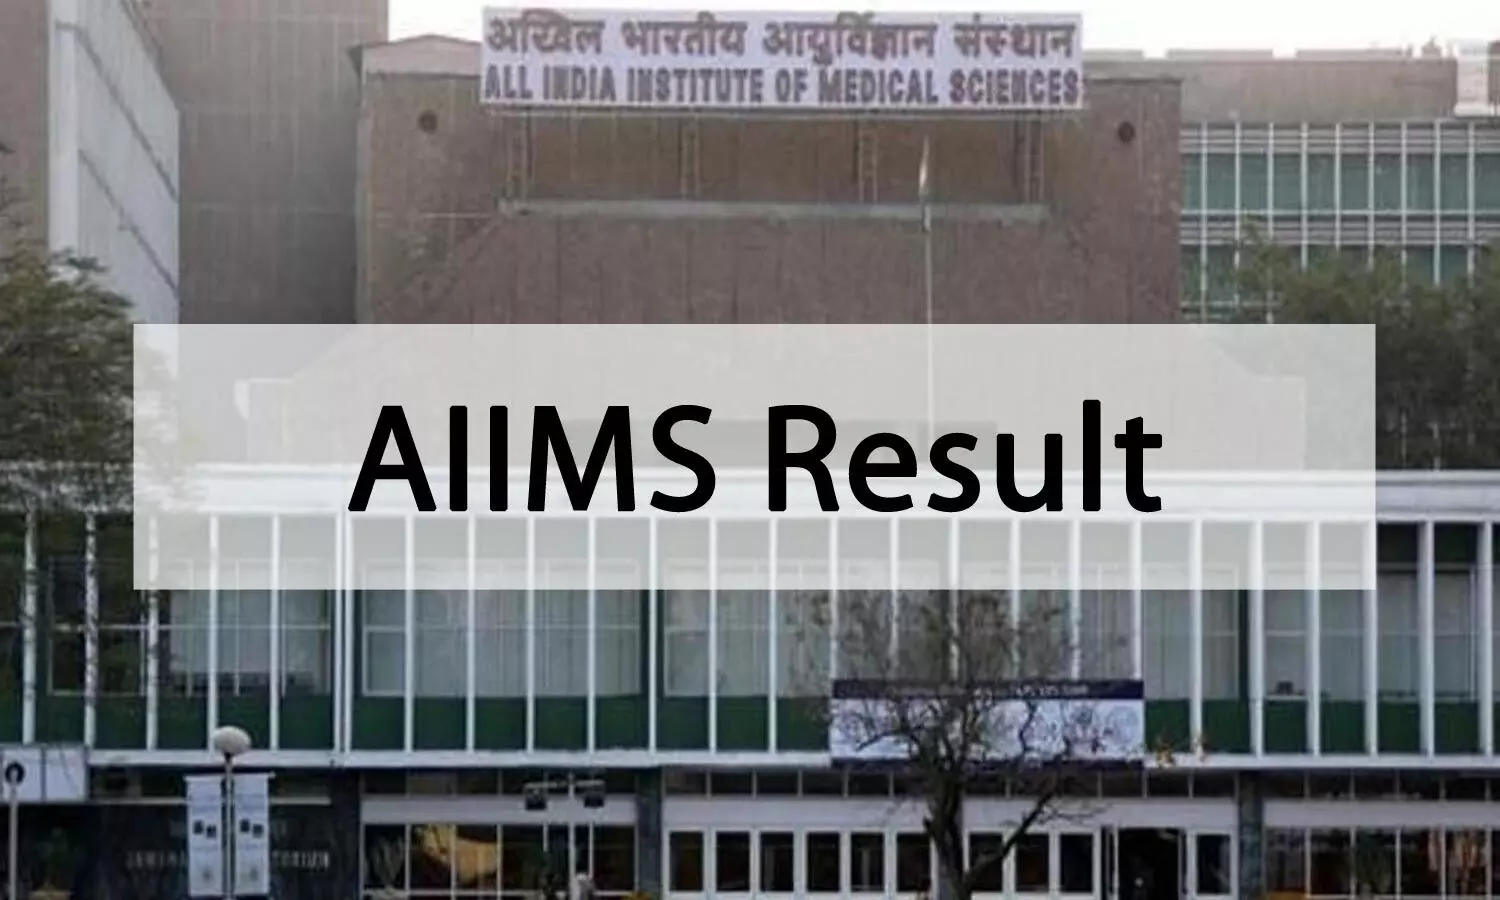 AIIMS PG 2021 Admissions: Results for Round 1 seat allocation released, Details